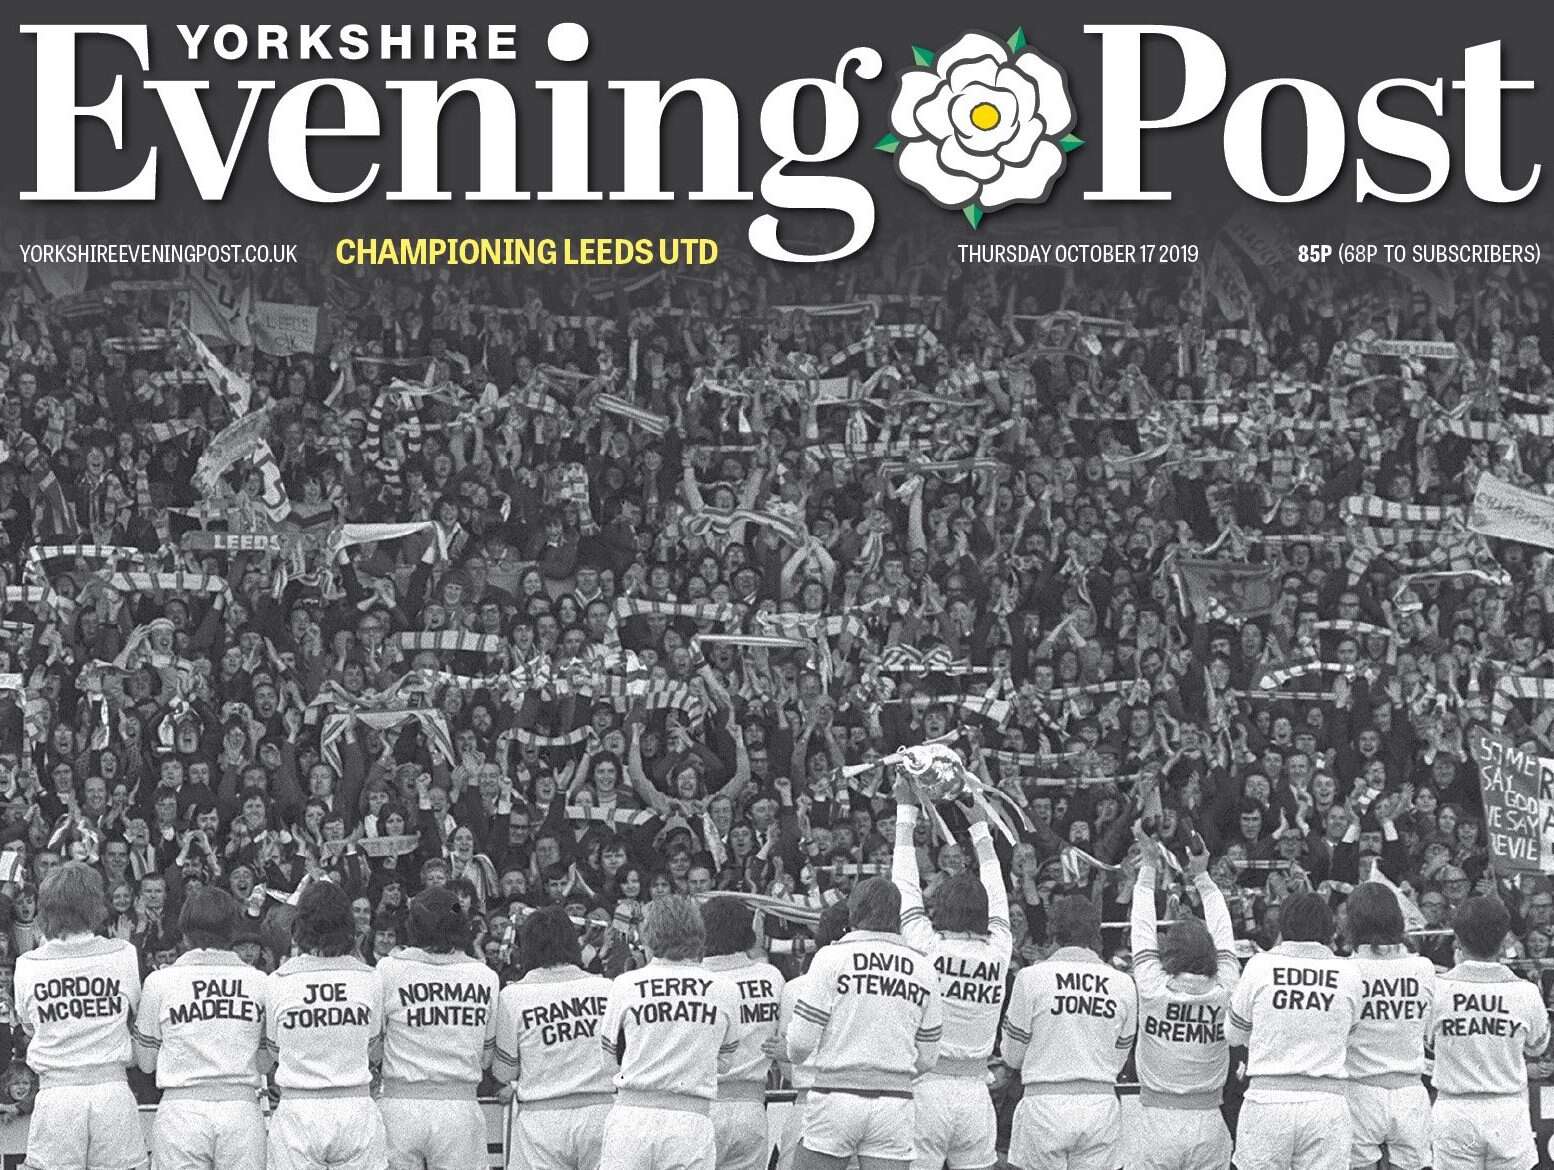 Yorkshire Evening Post appoints new editor